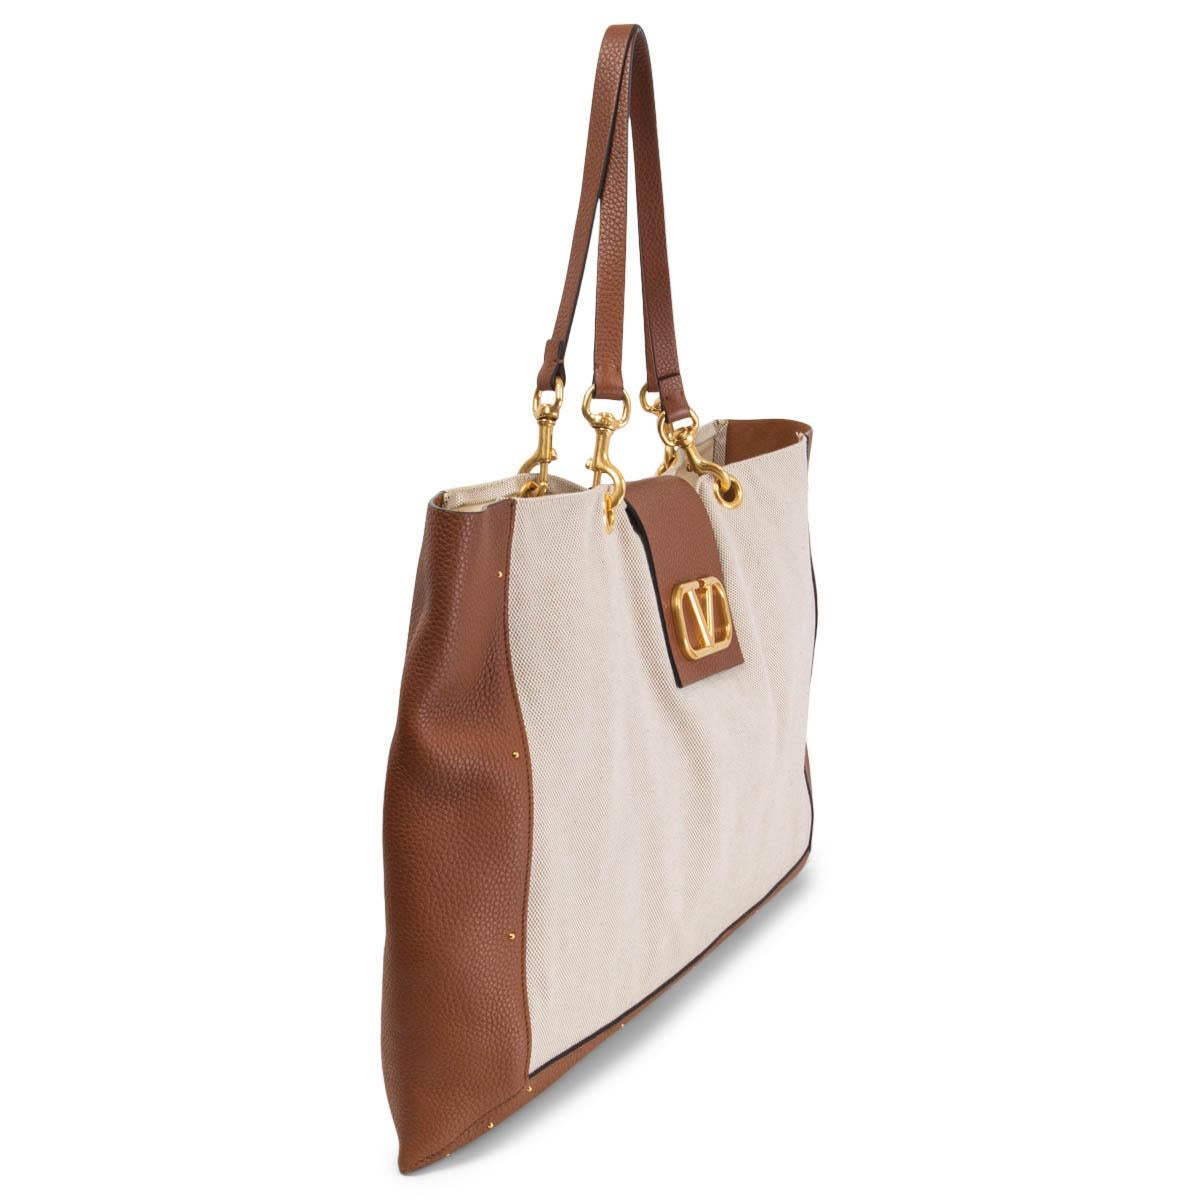 100% authentic Valentino Garavani City Safari tote bag in off-white canvas and cognac grained leather. Features removable handles and micro studs, a magnetic button closure, the iconic VLogo, off-white canvas lining and a red leather contrast zip